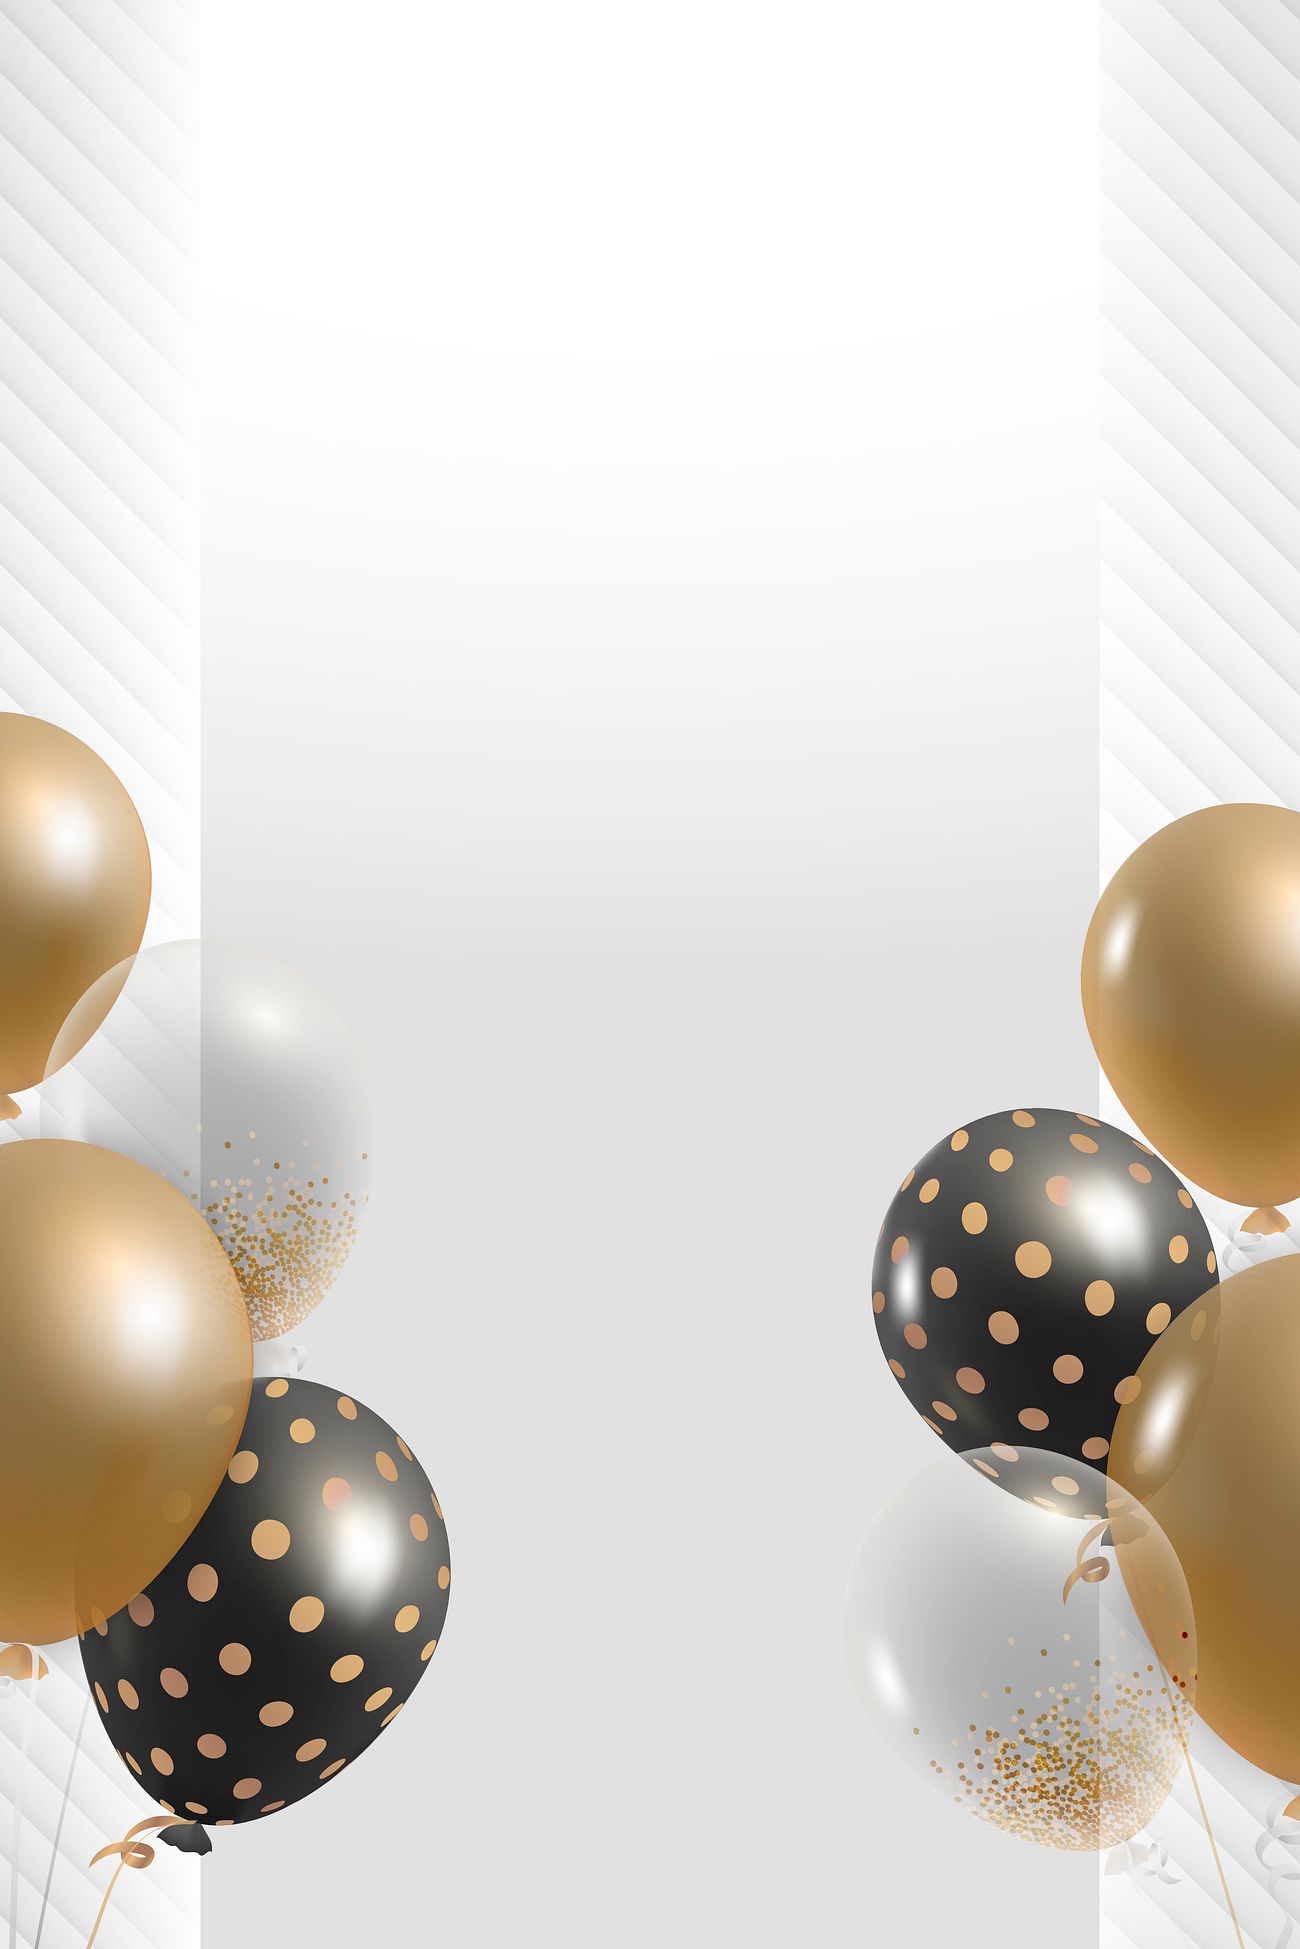 Download Gold and black party balloons frame vector | Free vector ...